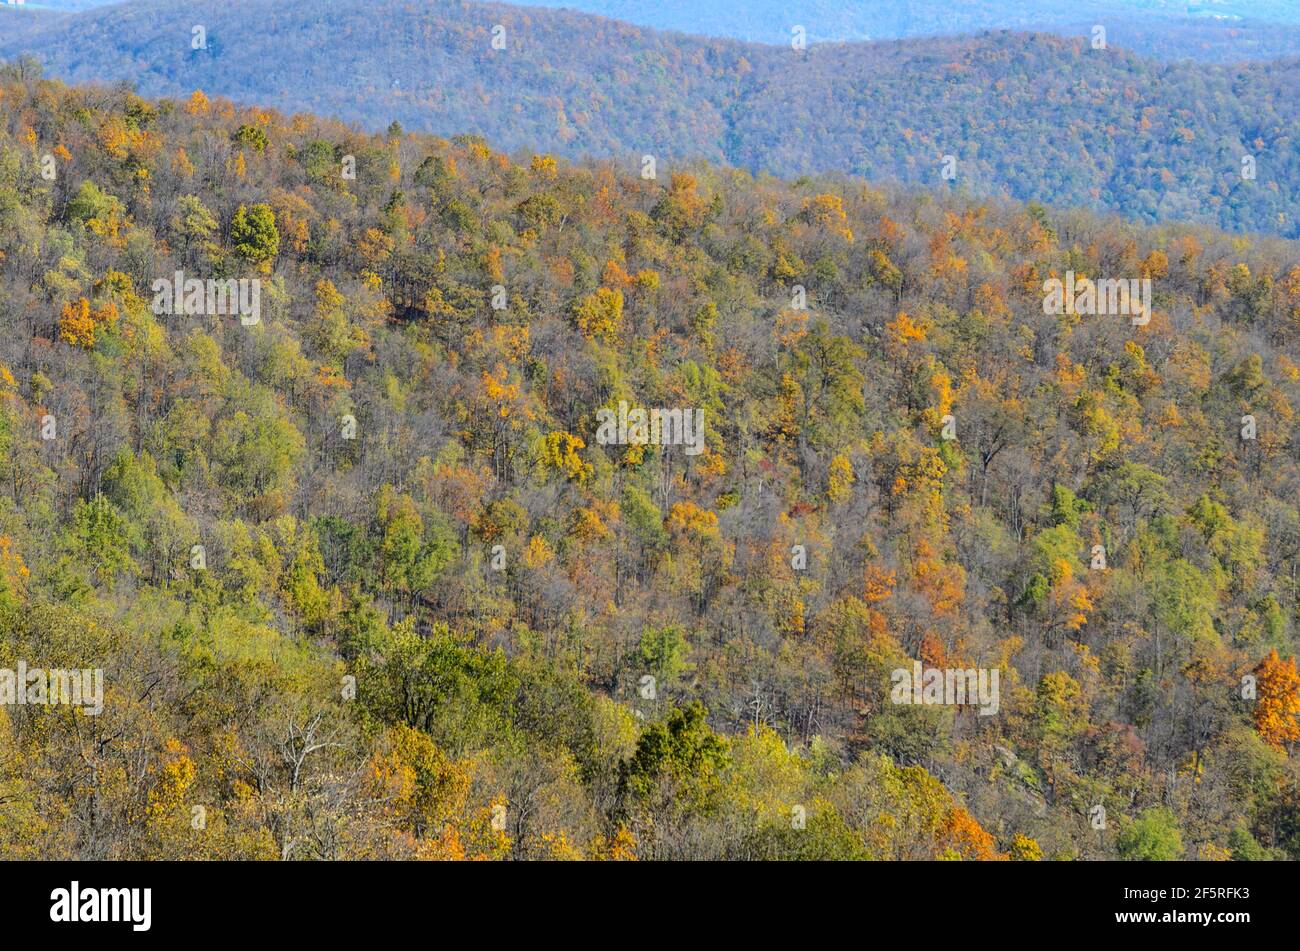 A view of the fall trees in Shenandoah National Park, with reds, golds, yellows and greens on display. Stock Photo